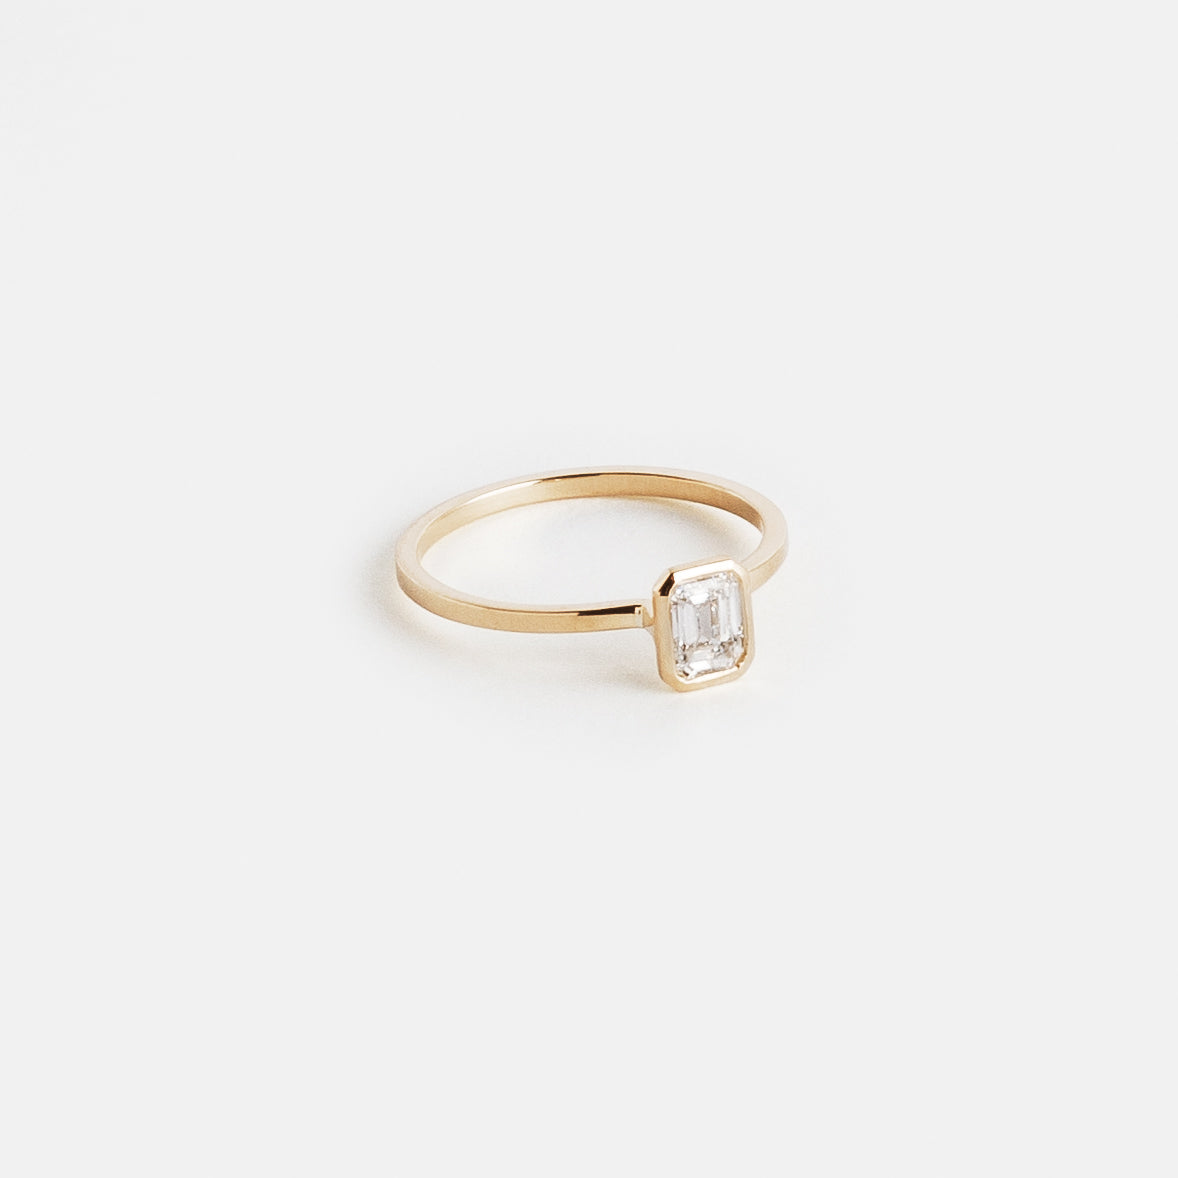 Auda Cool Ring in 14k Gold set with an emerald cut natural diamond By SHW Fine Jewelry NYC